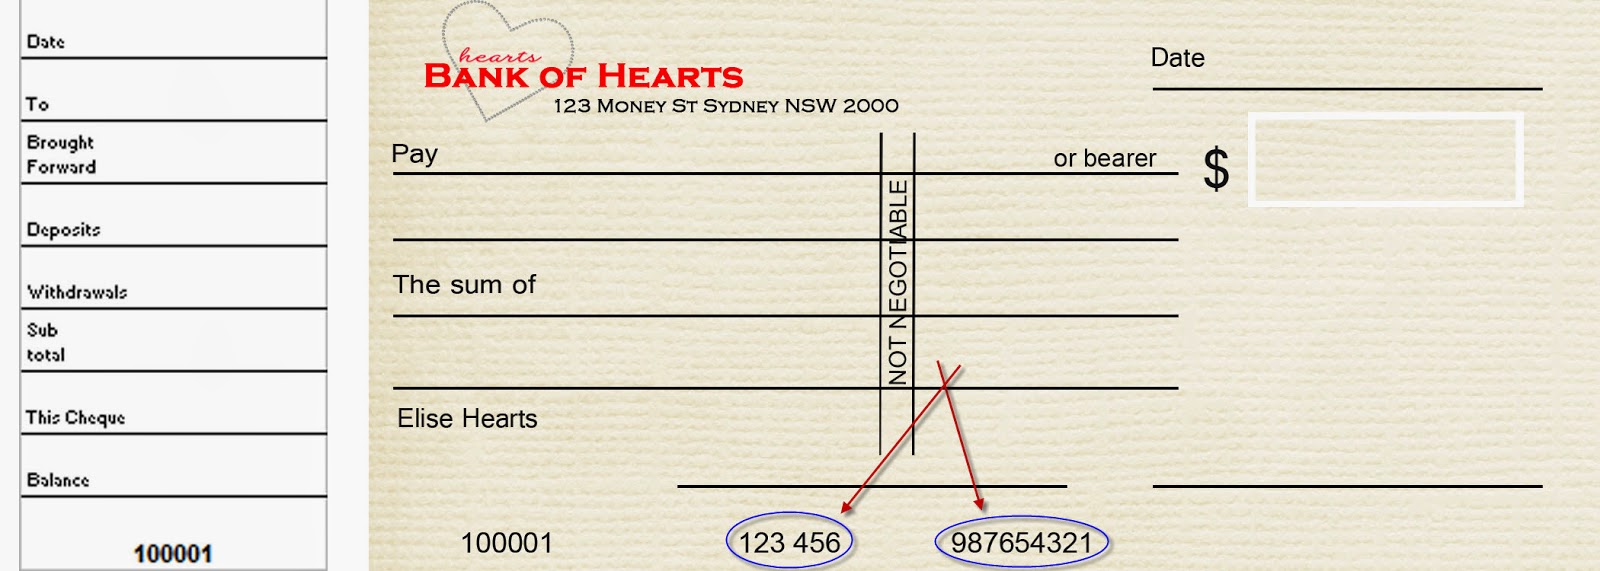 Mummy Hearts Money: The Art of Writing a Cheque